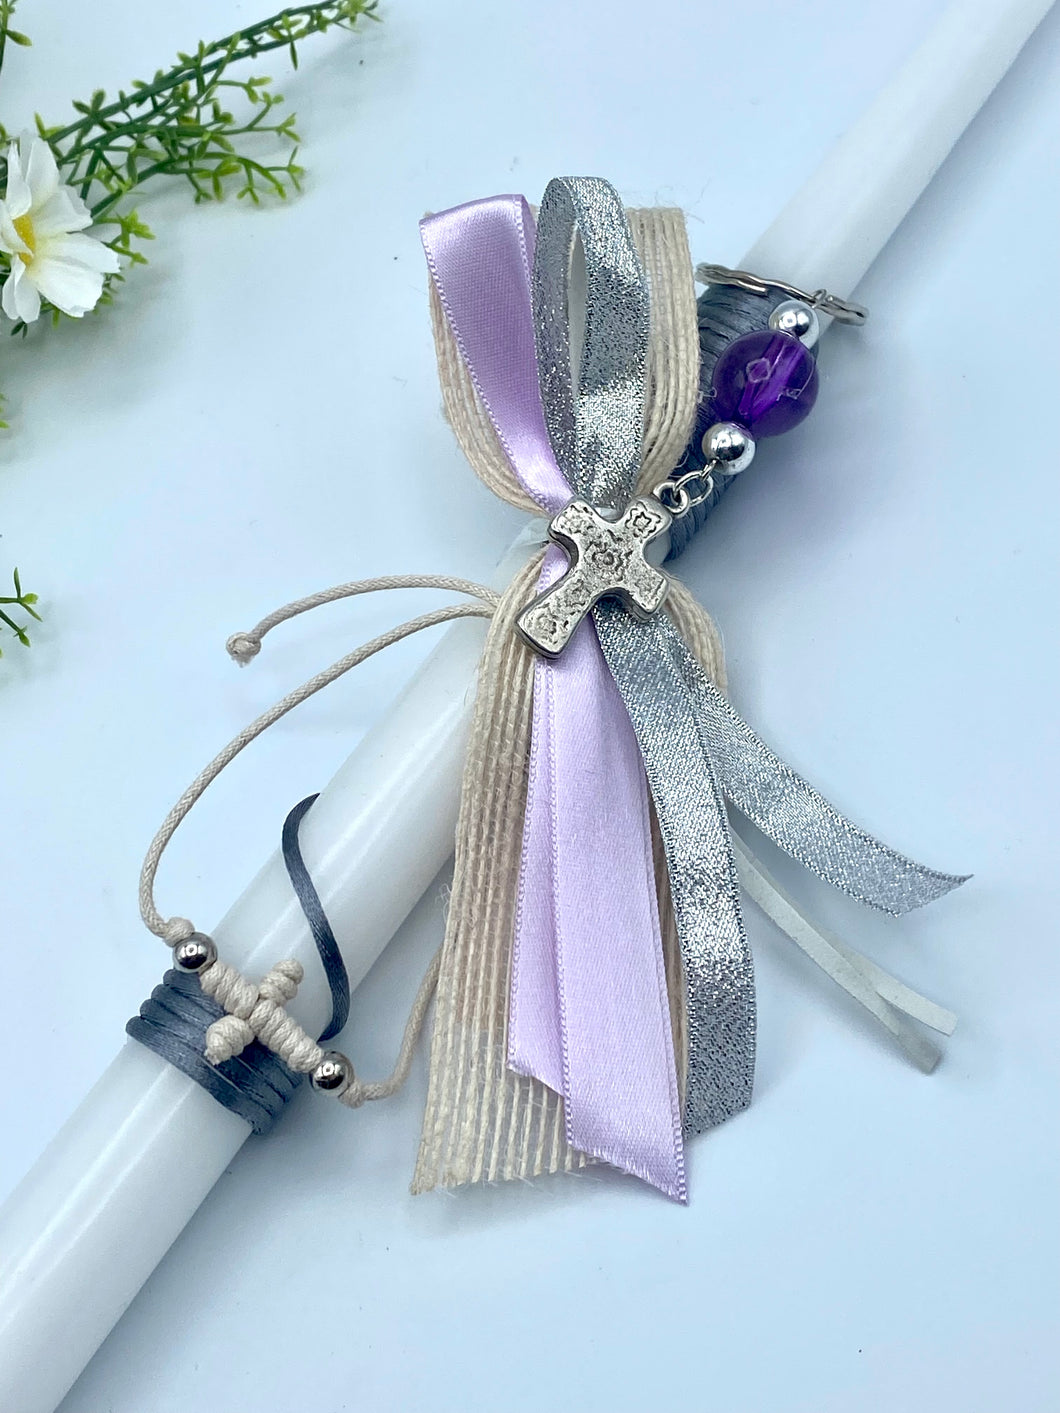 Corded Easter Candle with Metal Cross keychain, Glass Bead and Adjustable Bracelet EC202246